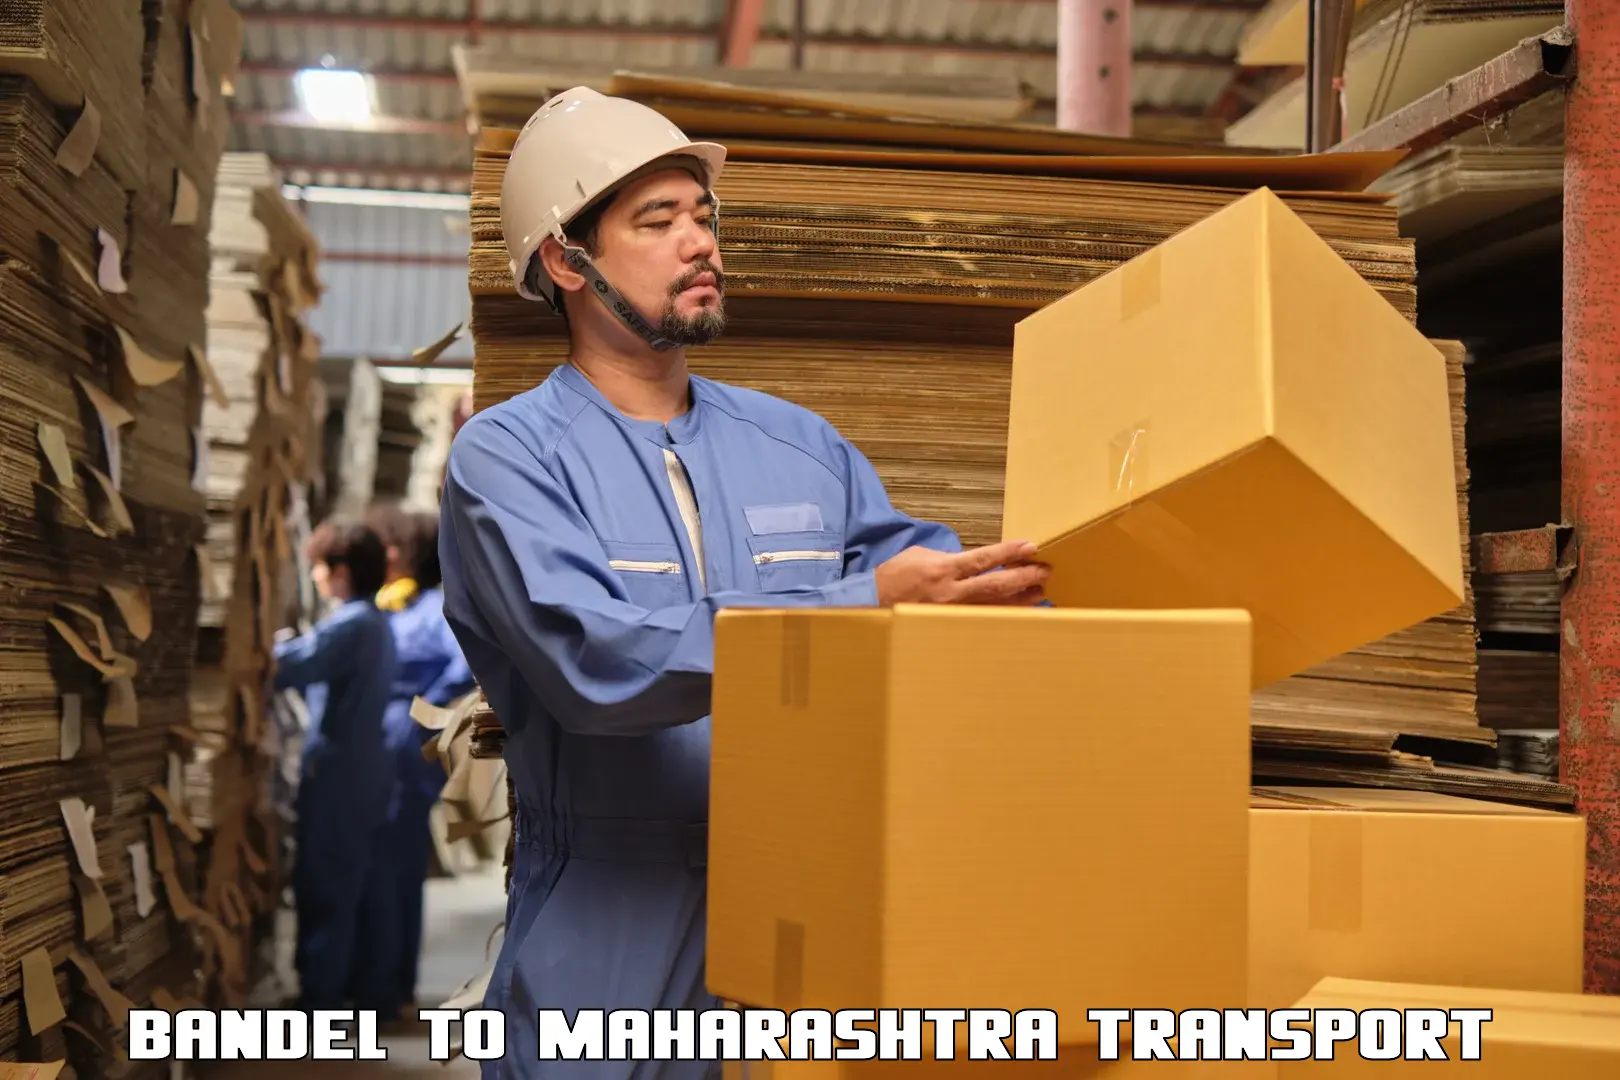 Air freight transport services Bandel to Pimpri Chinchwad